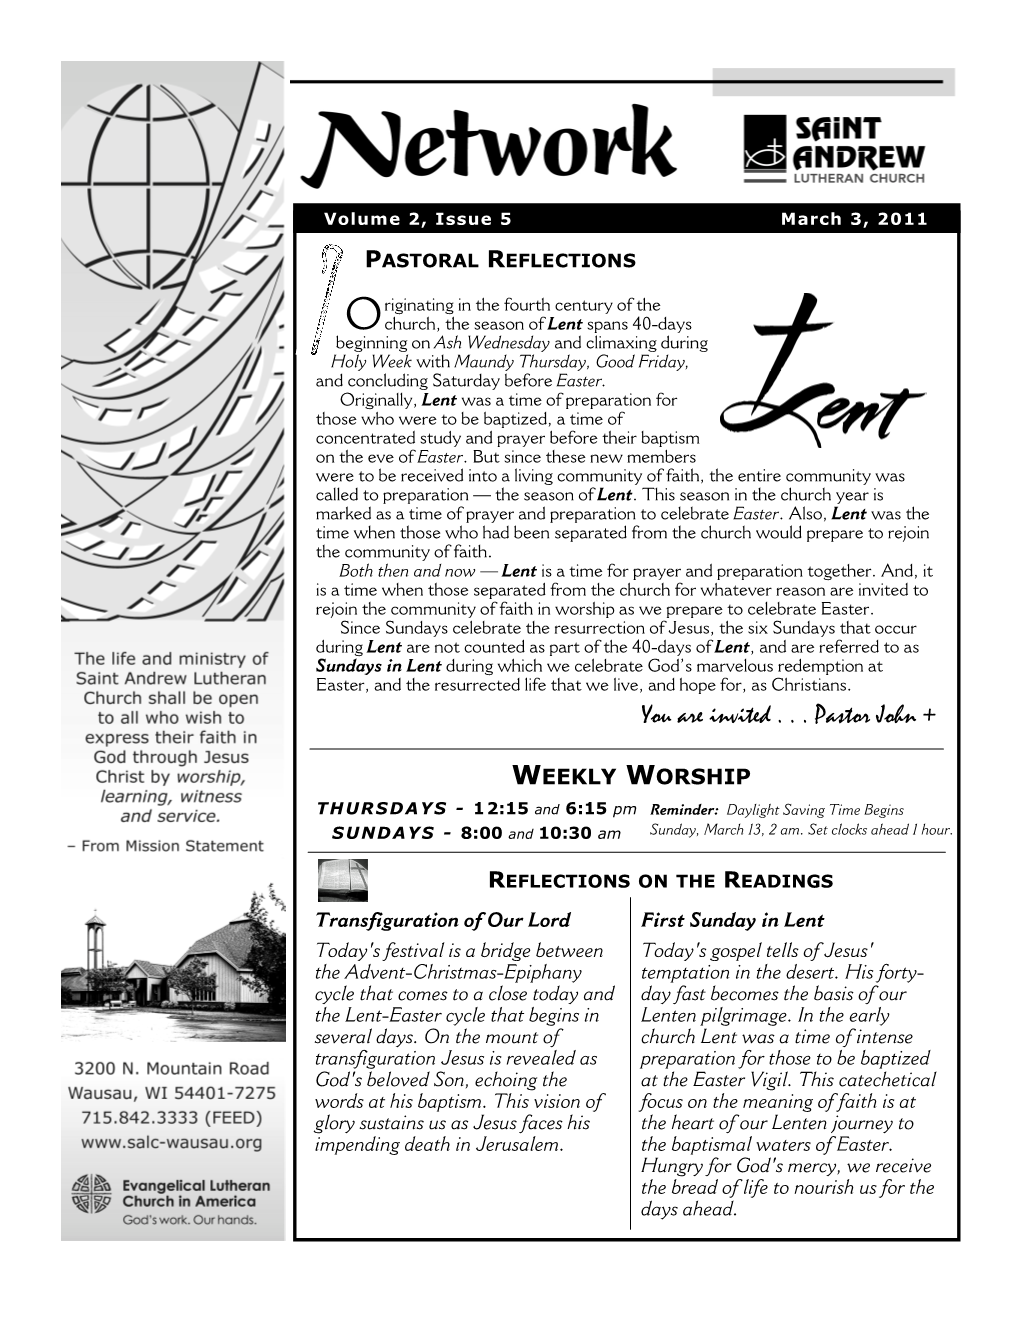 Network for Weeks of 3-6, 3-13 2011